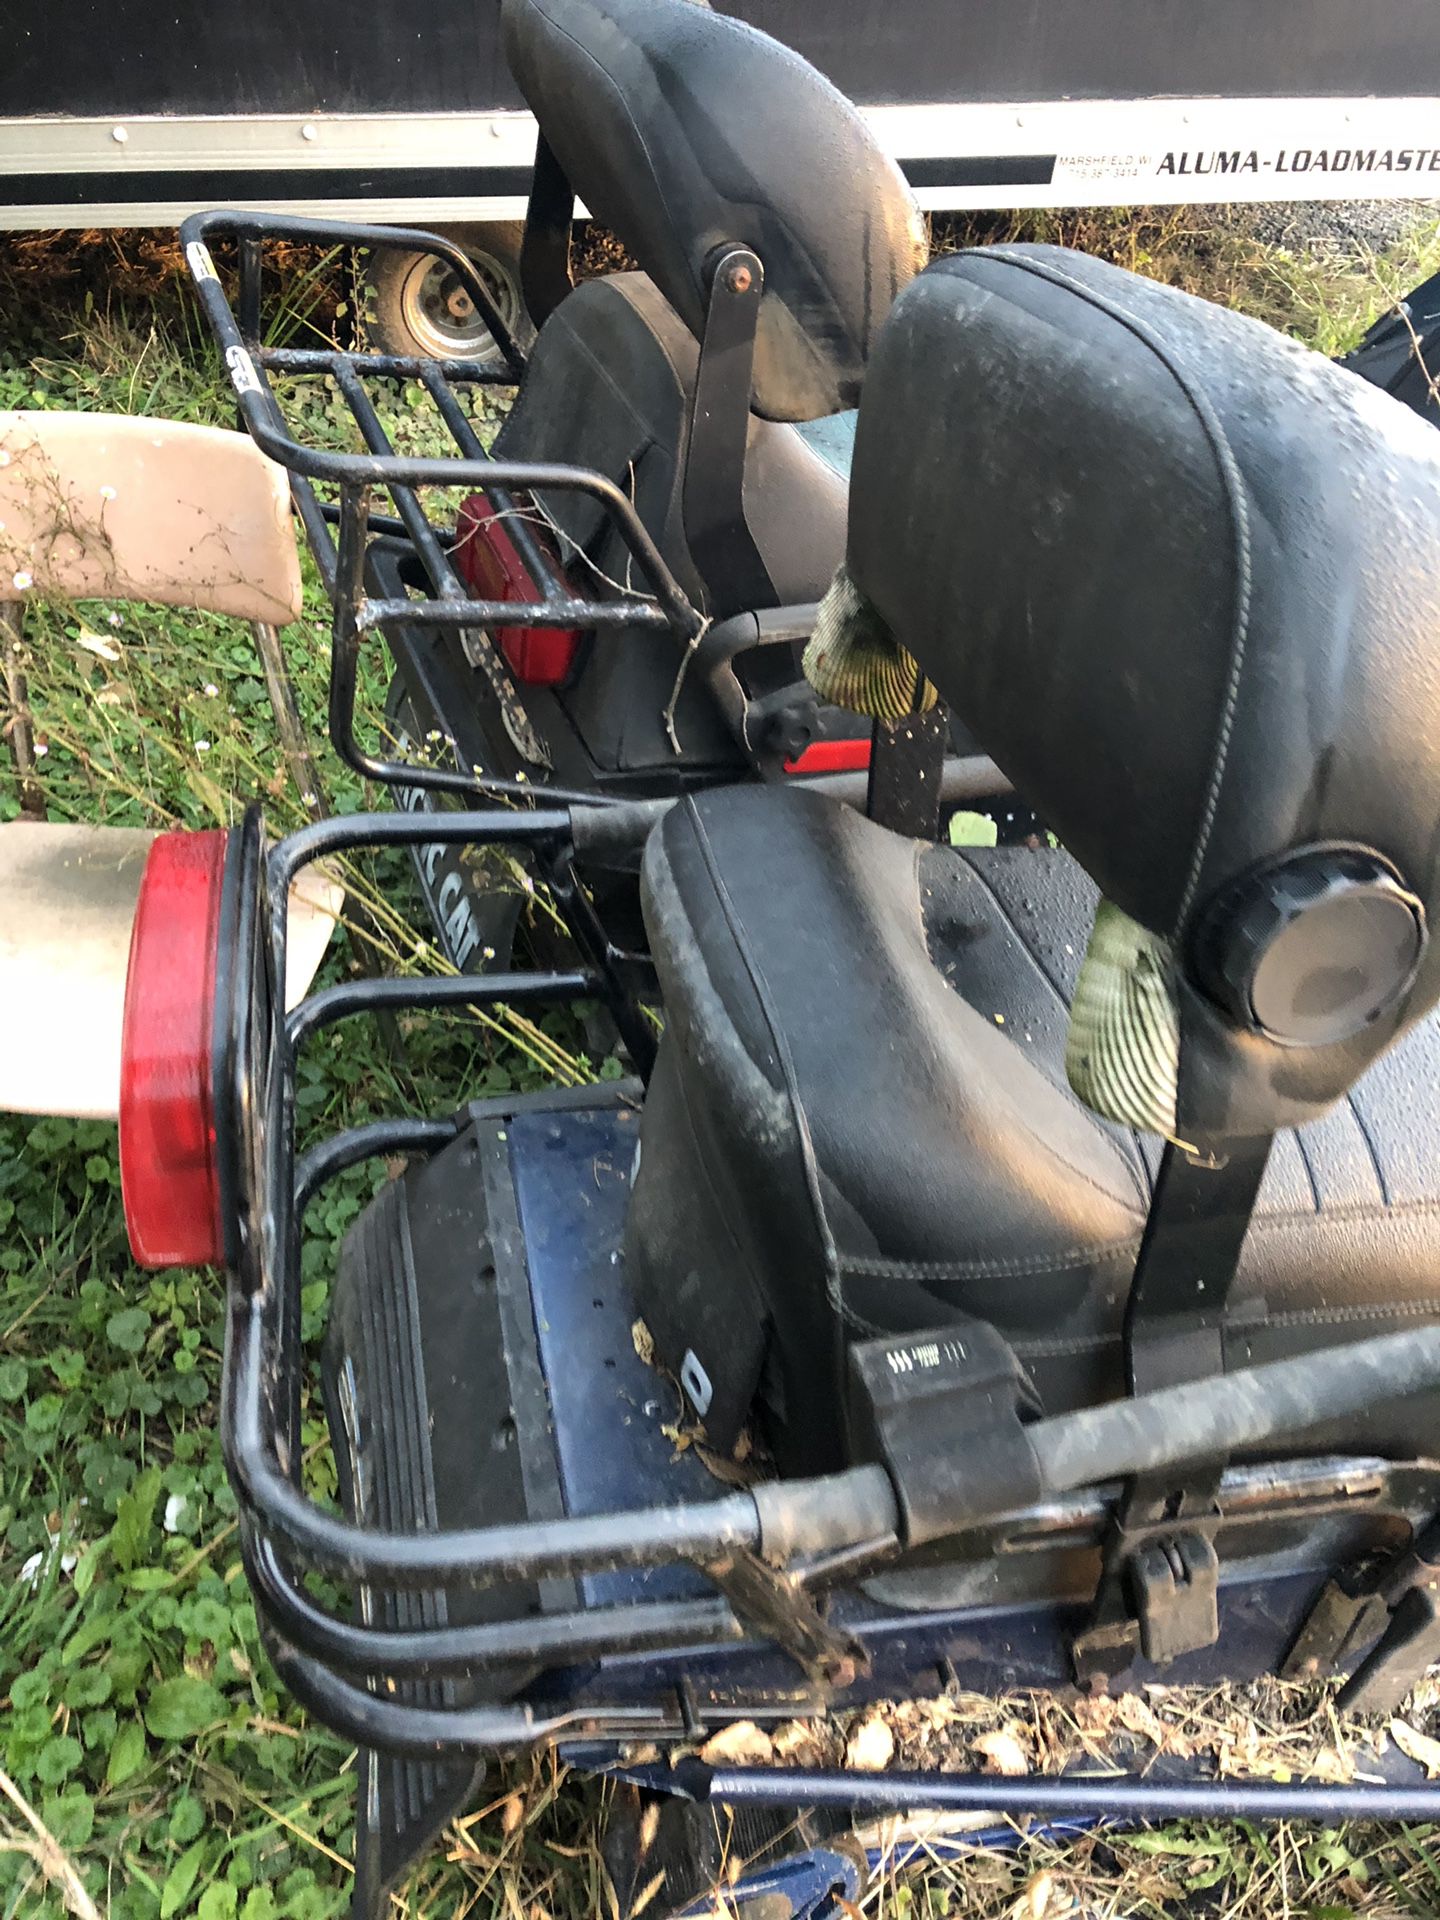 2 snowmobile for for parts 600